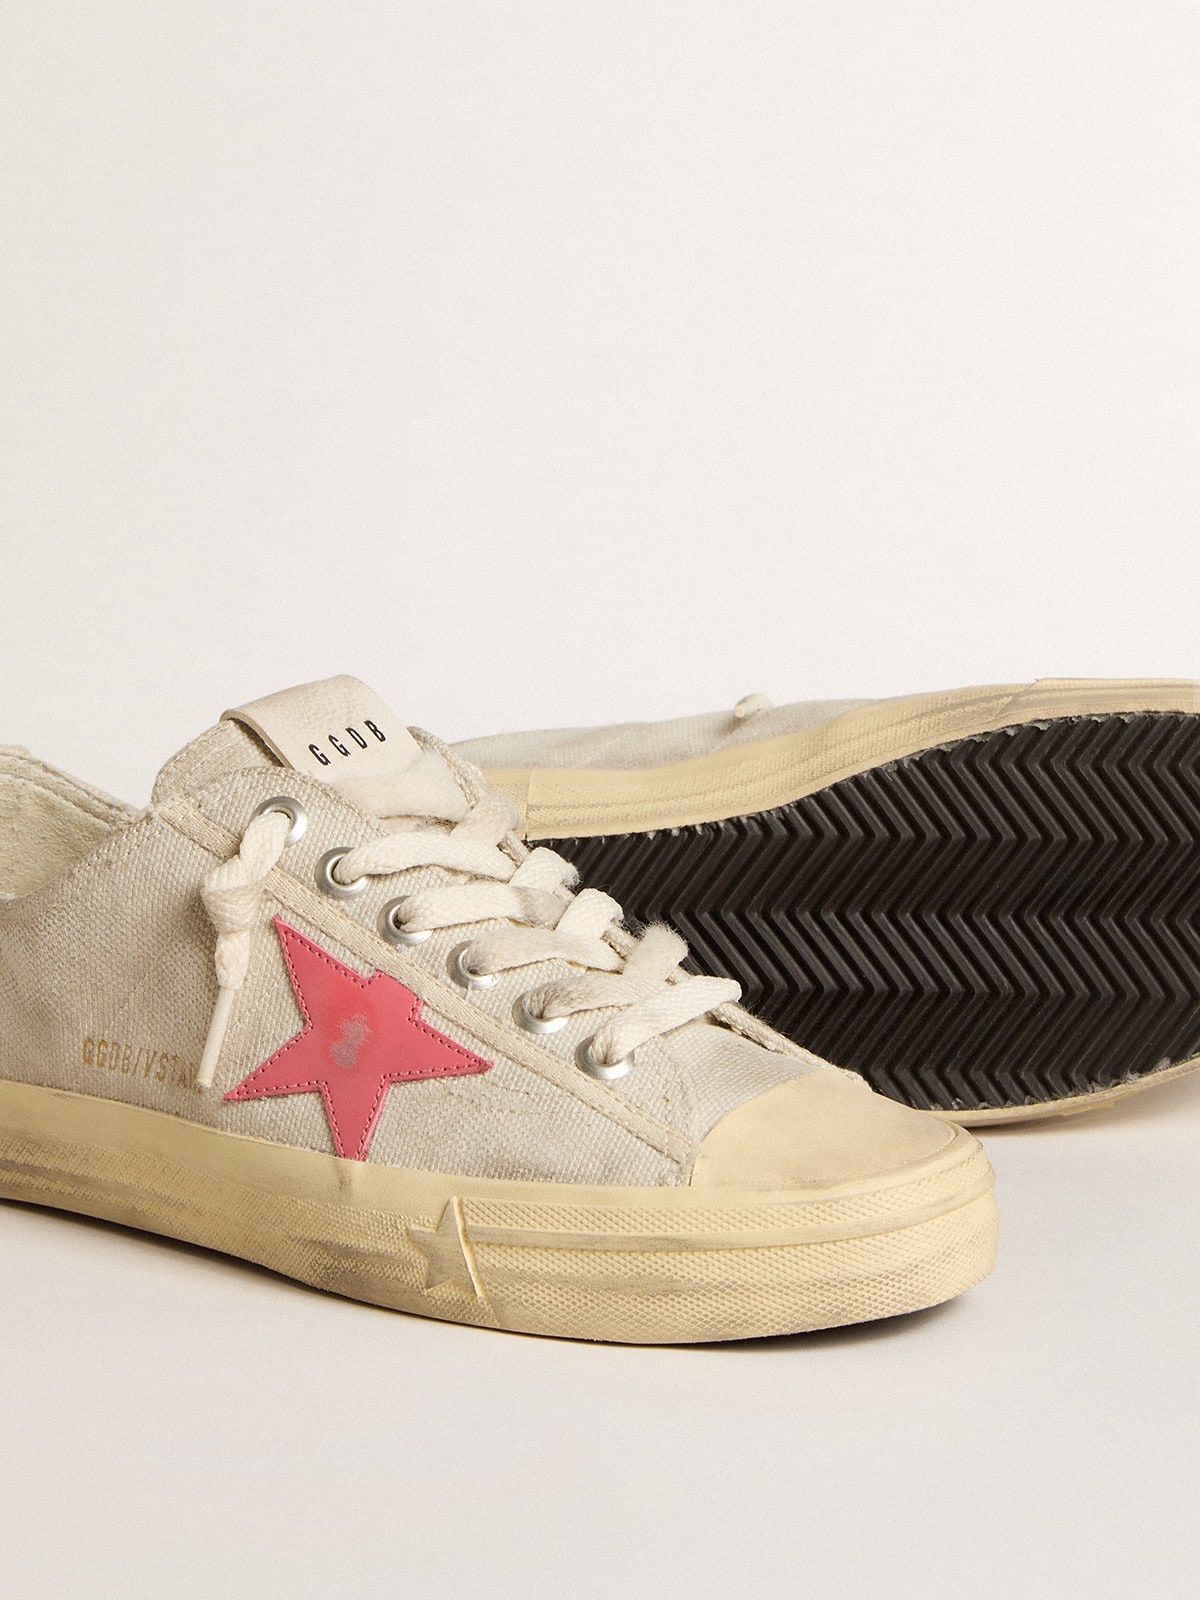 Women's V-Star in light gray canvas with a red leather star - 3